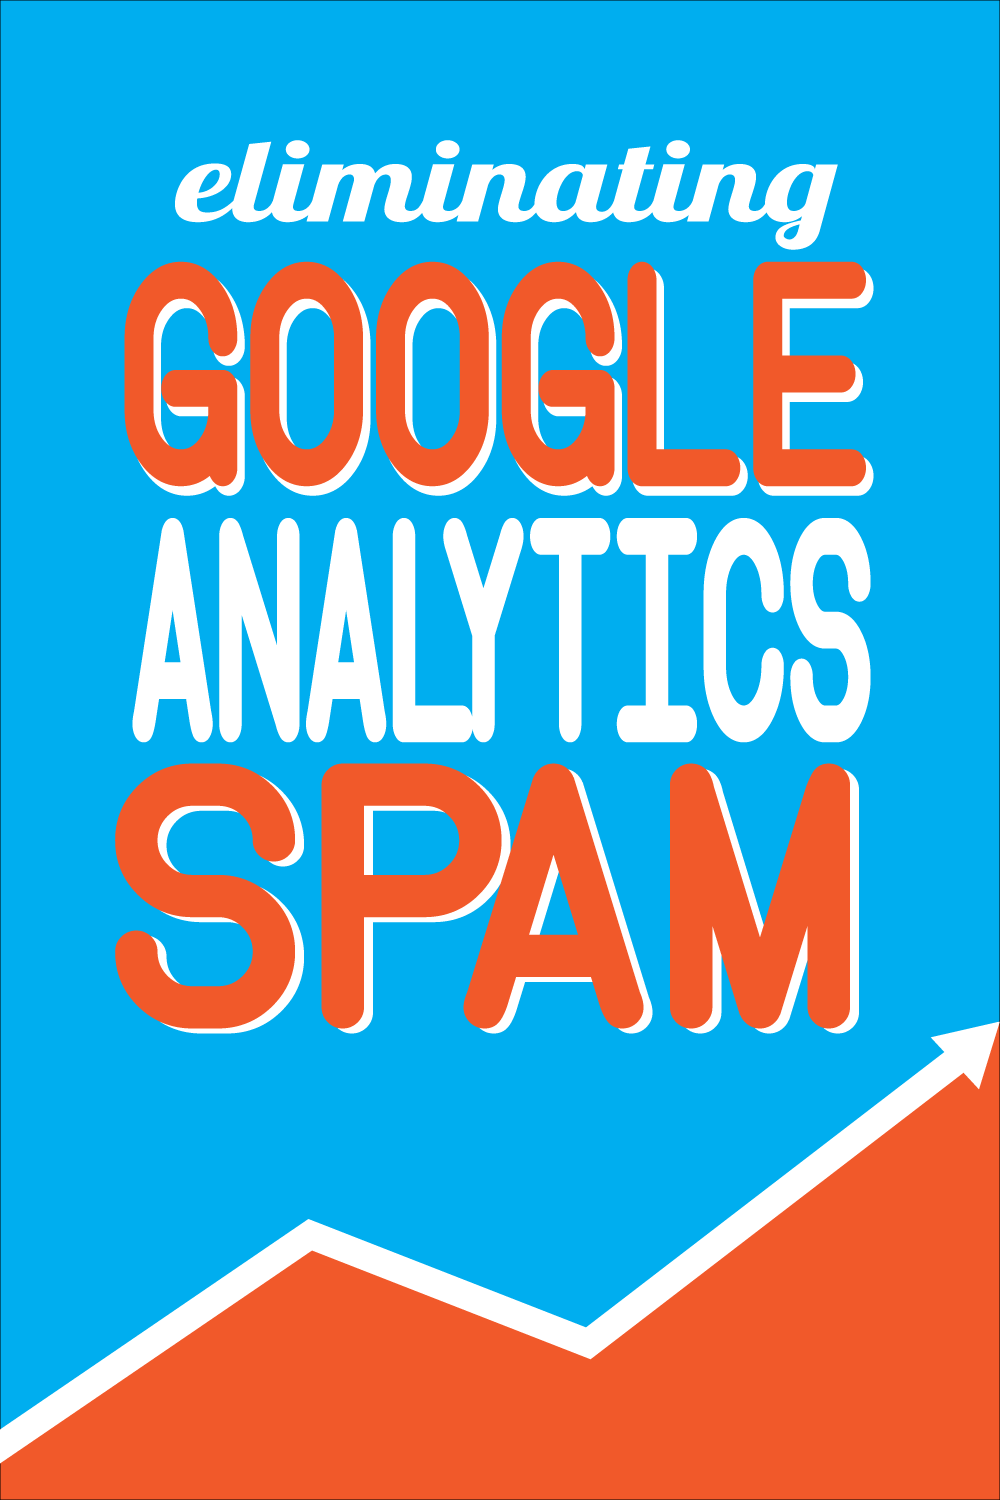 Blue and orange graphic that reads 'Eliminating Google Analytics Spam'